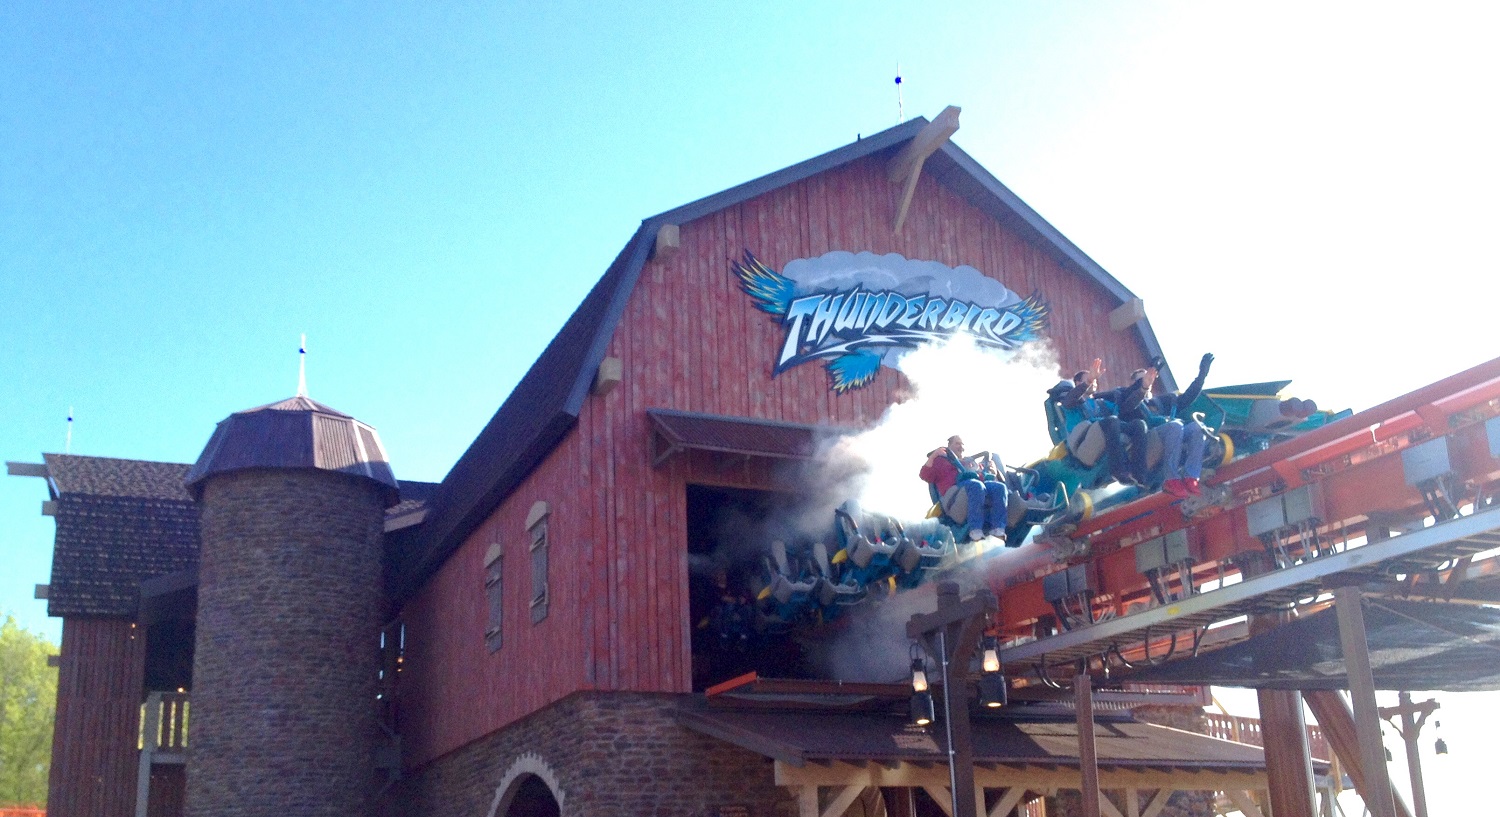 This is an image of the launch station barn and the riders are propelled forward with heart pumping force and speed.